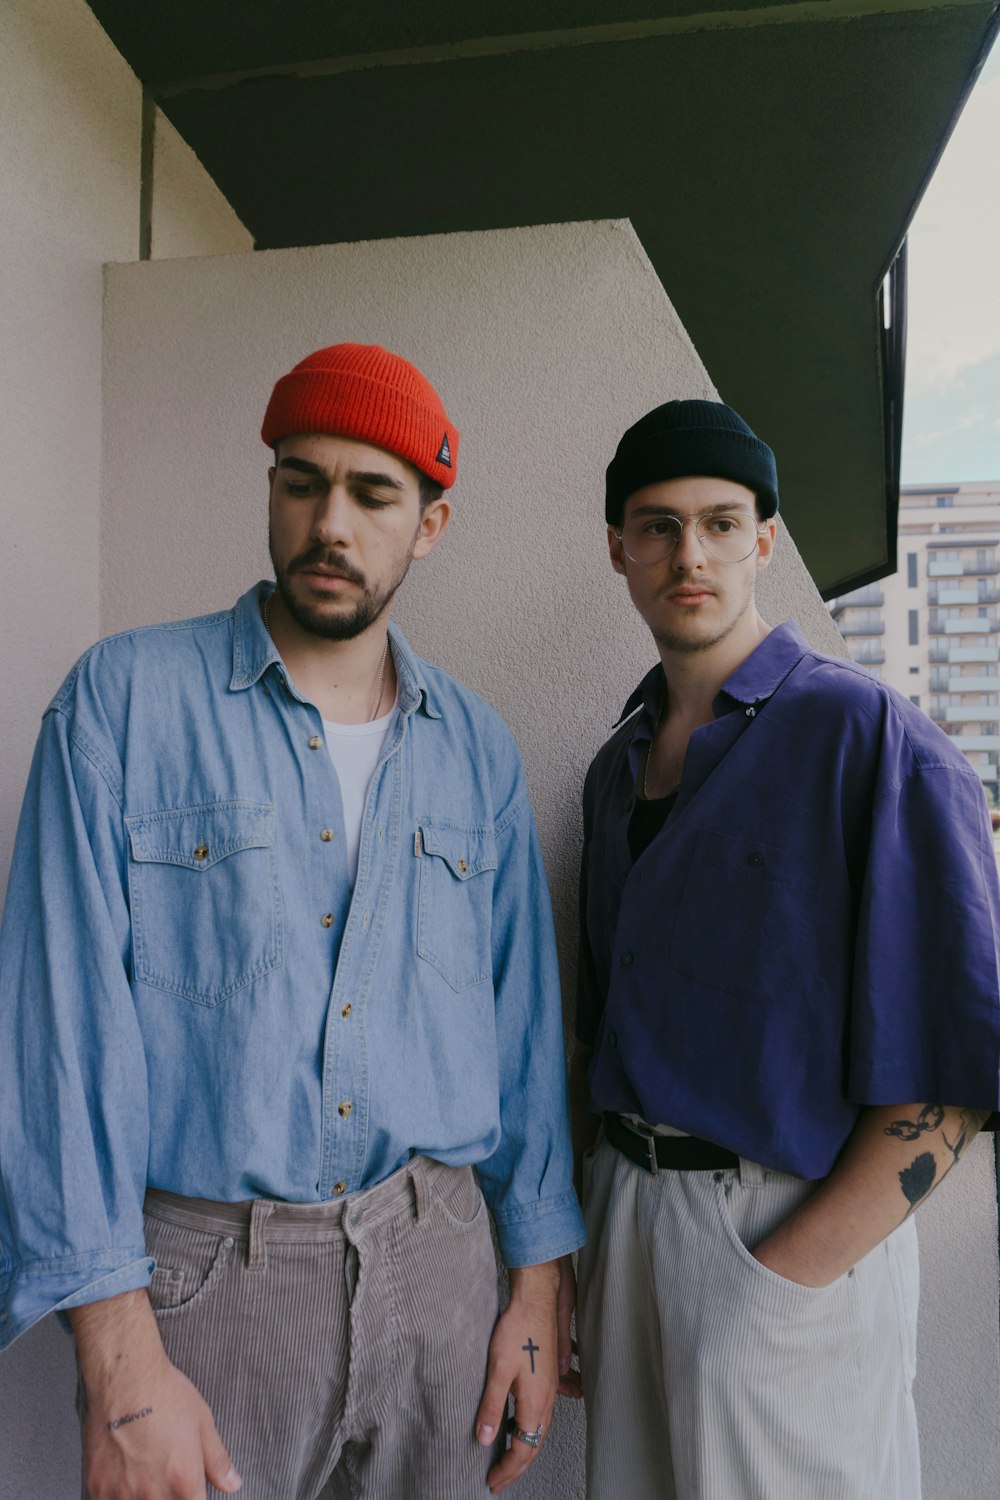 man in blue button up shirt standing beside man in red knit cap